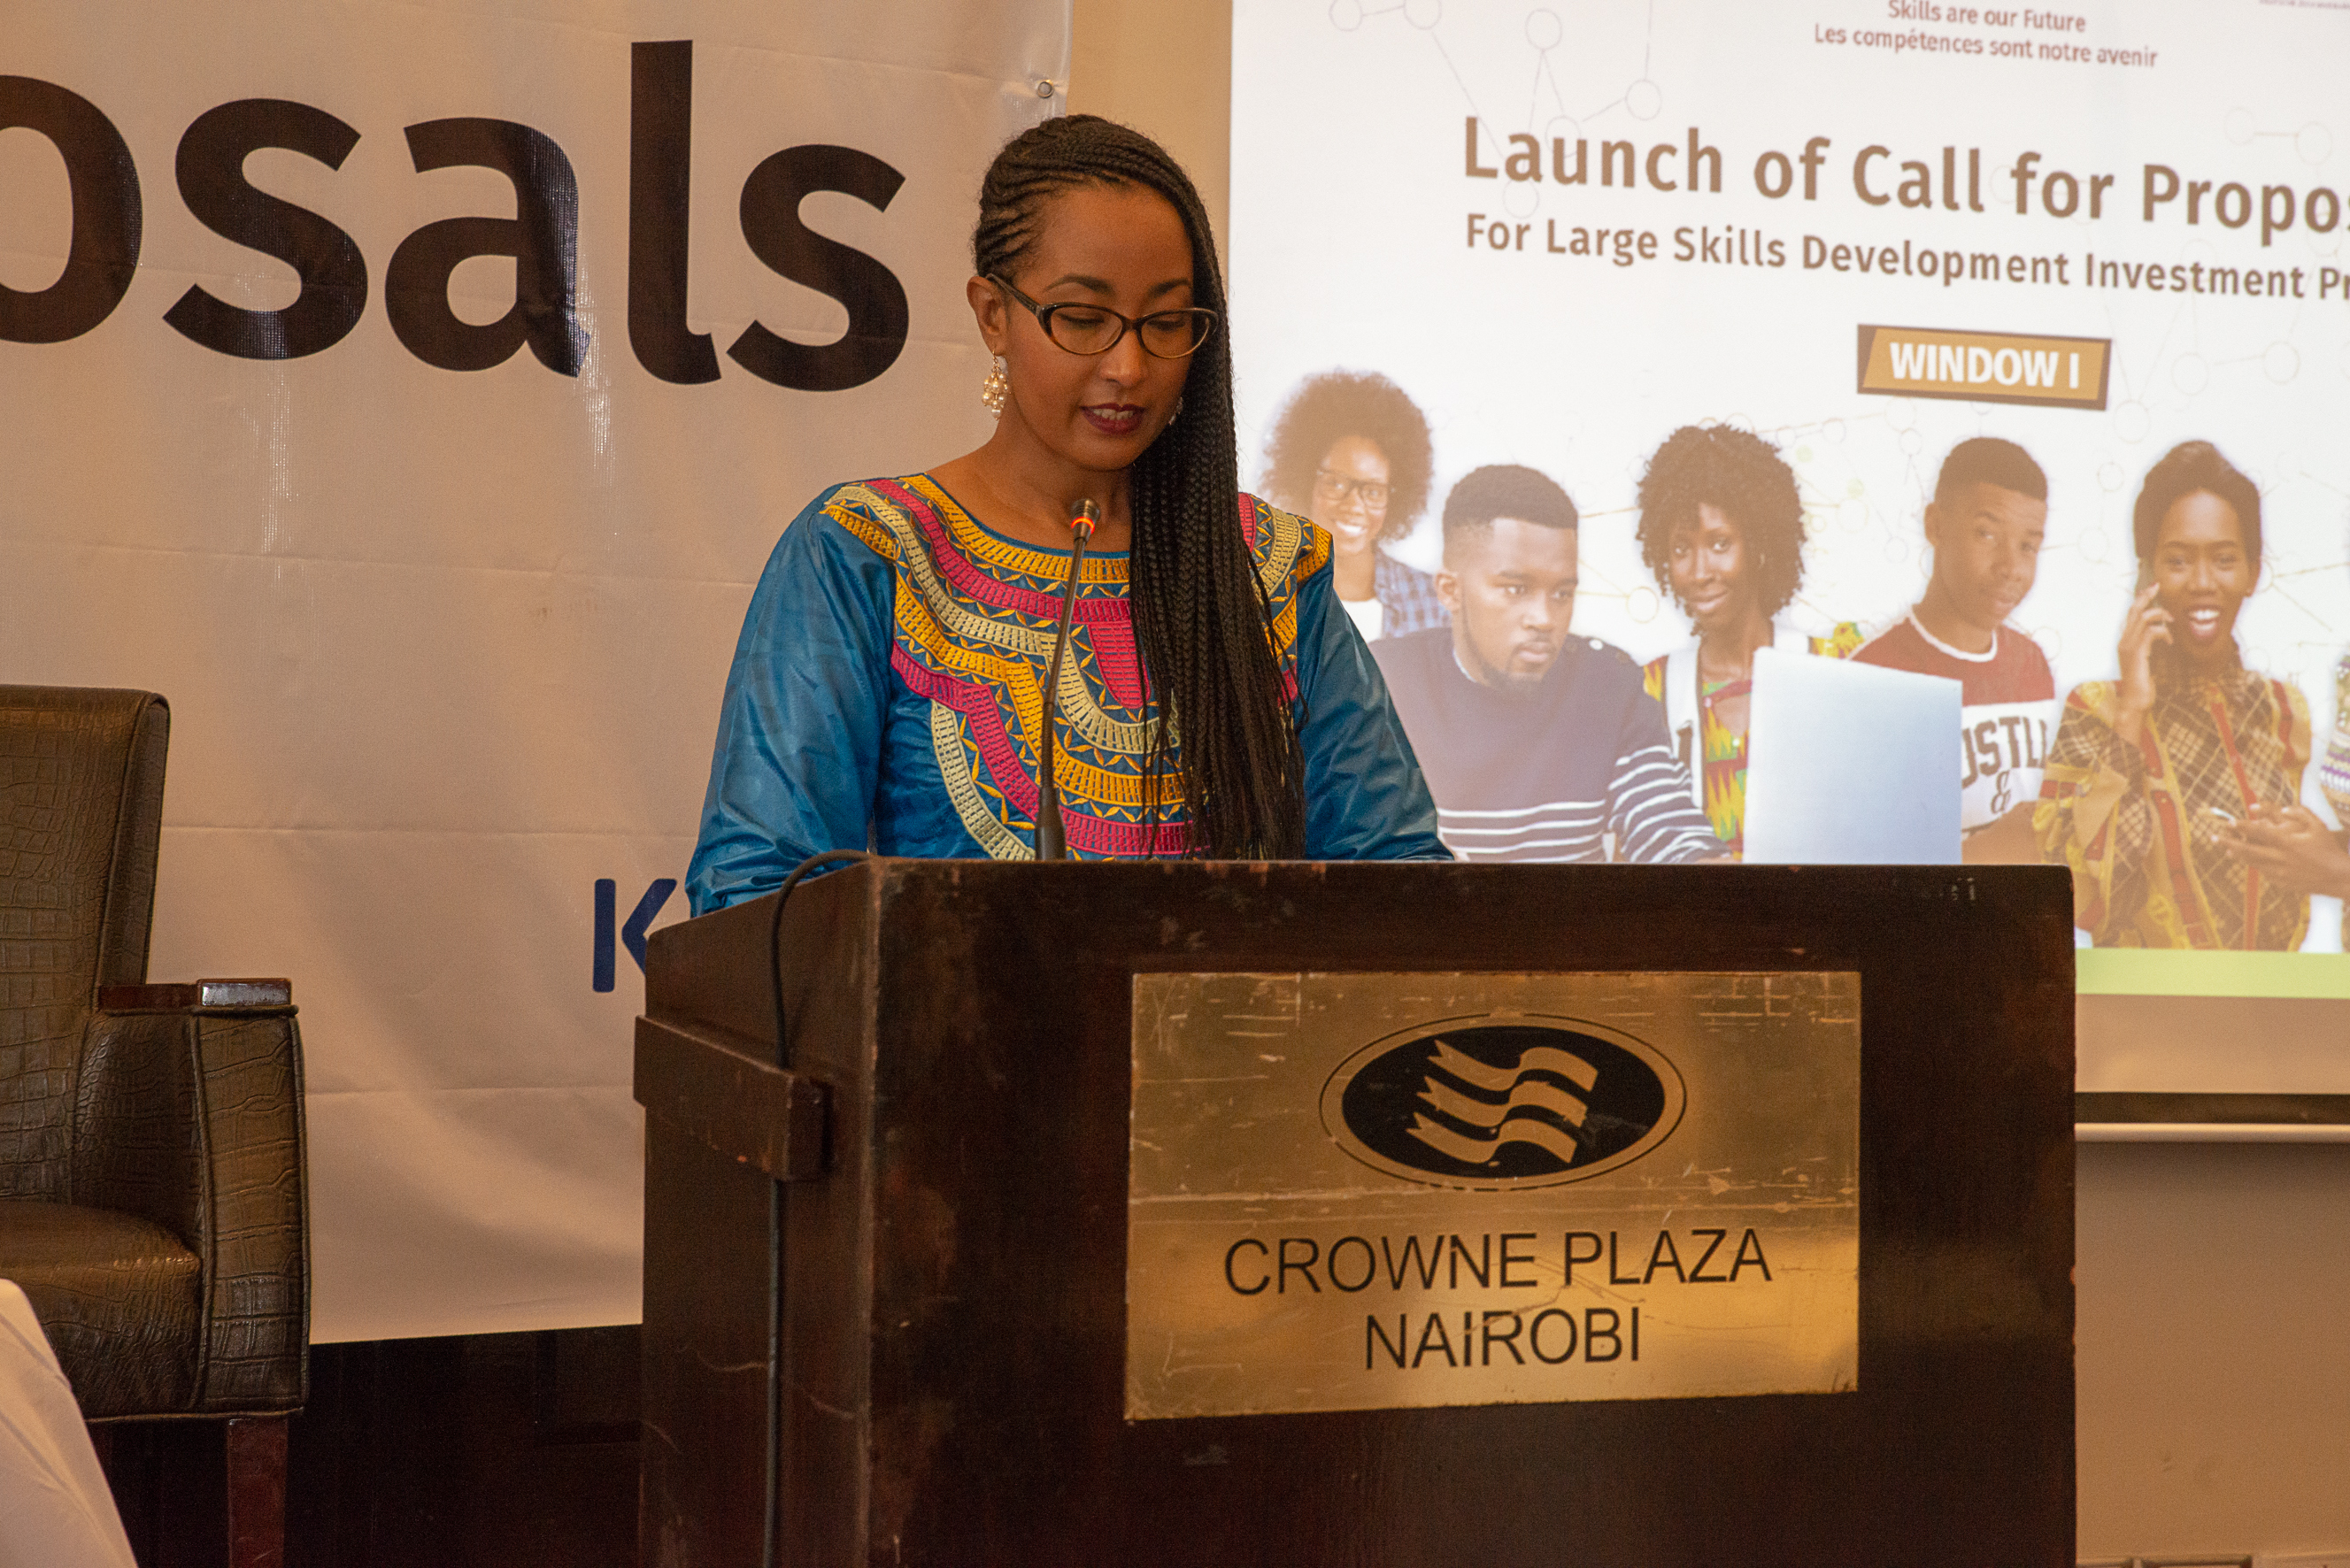 Launch of Window I in Kenya, speeches and photos